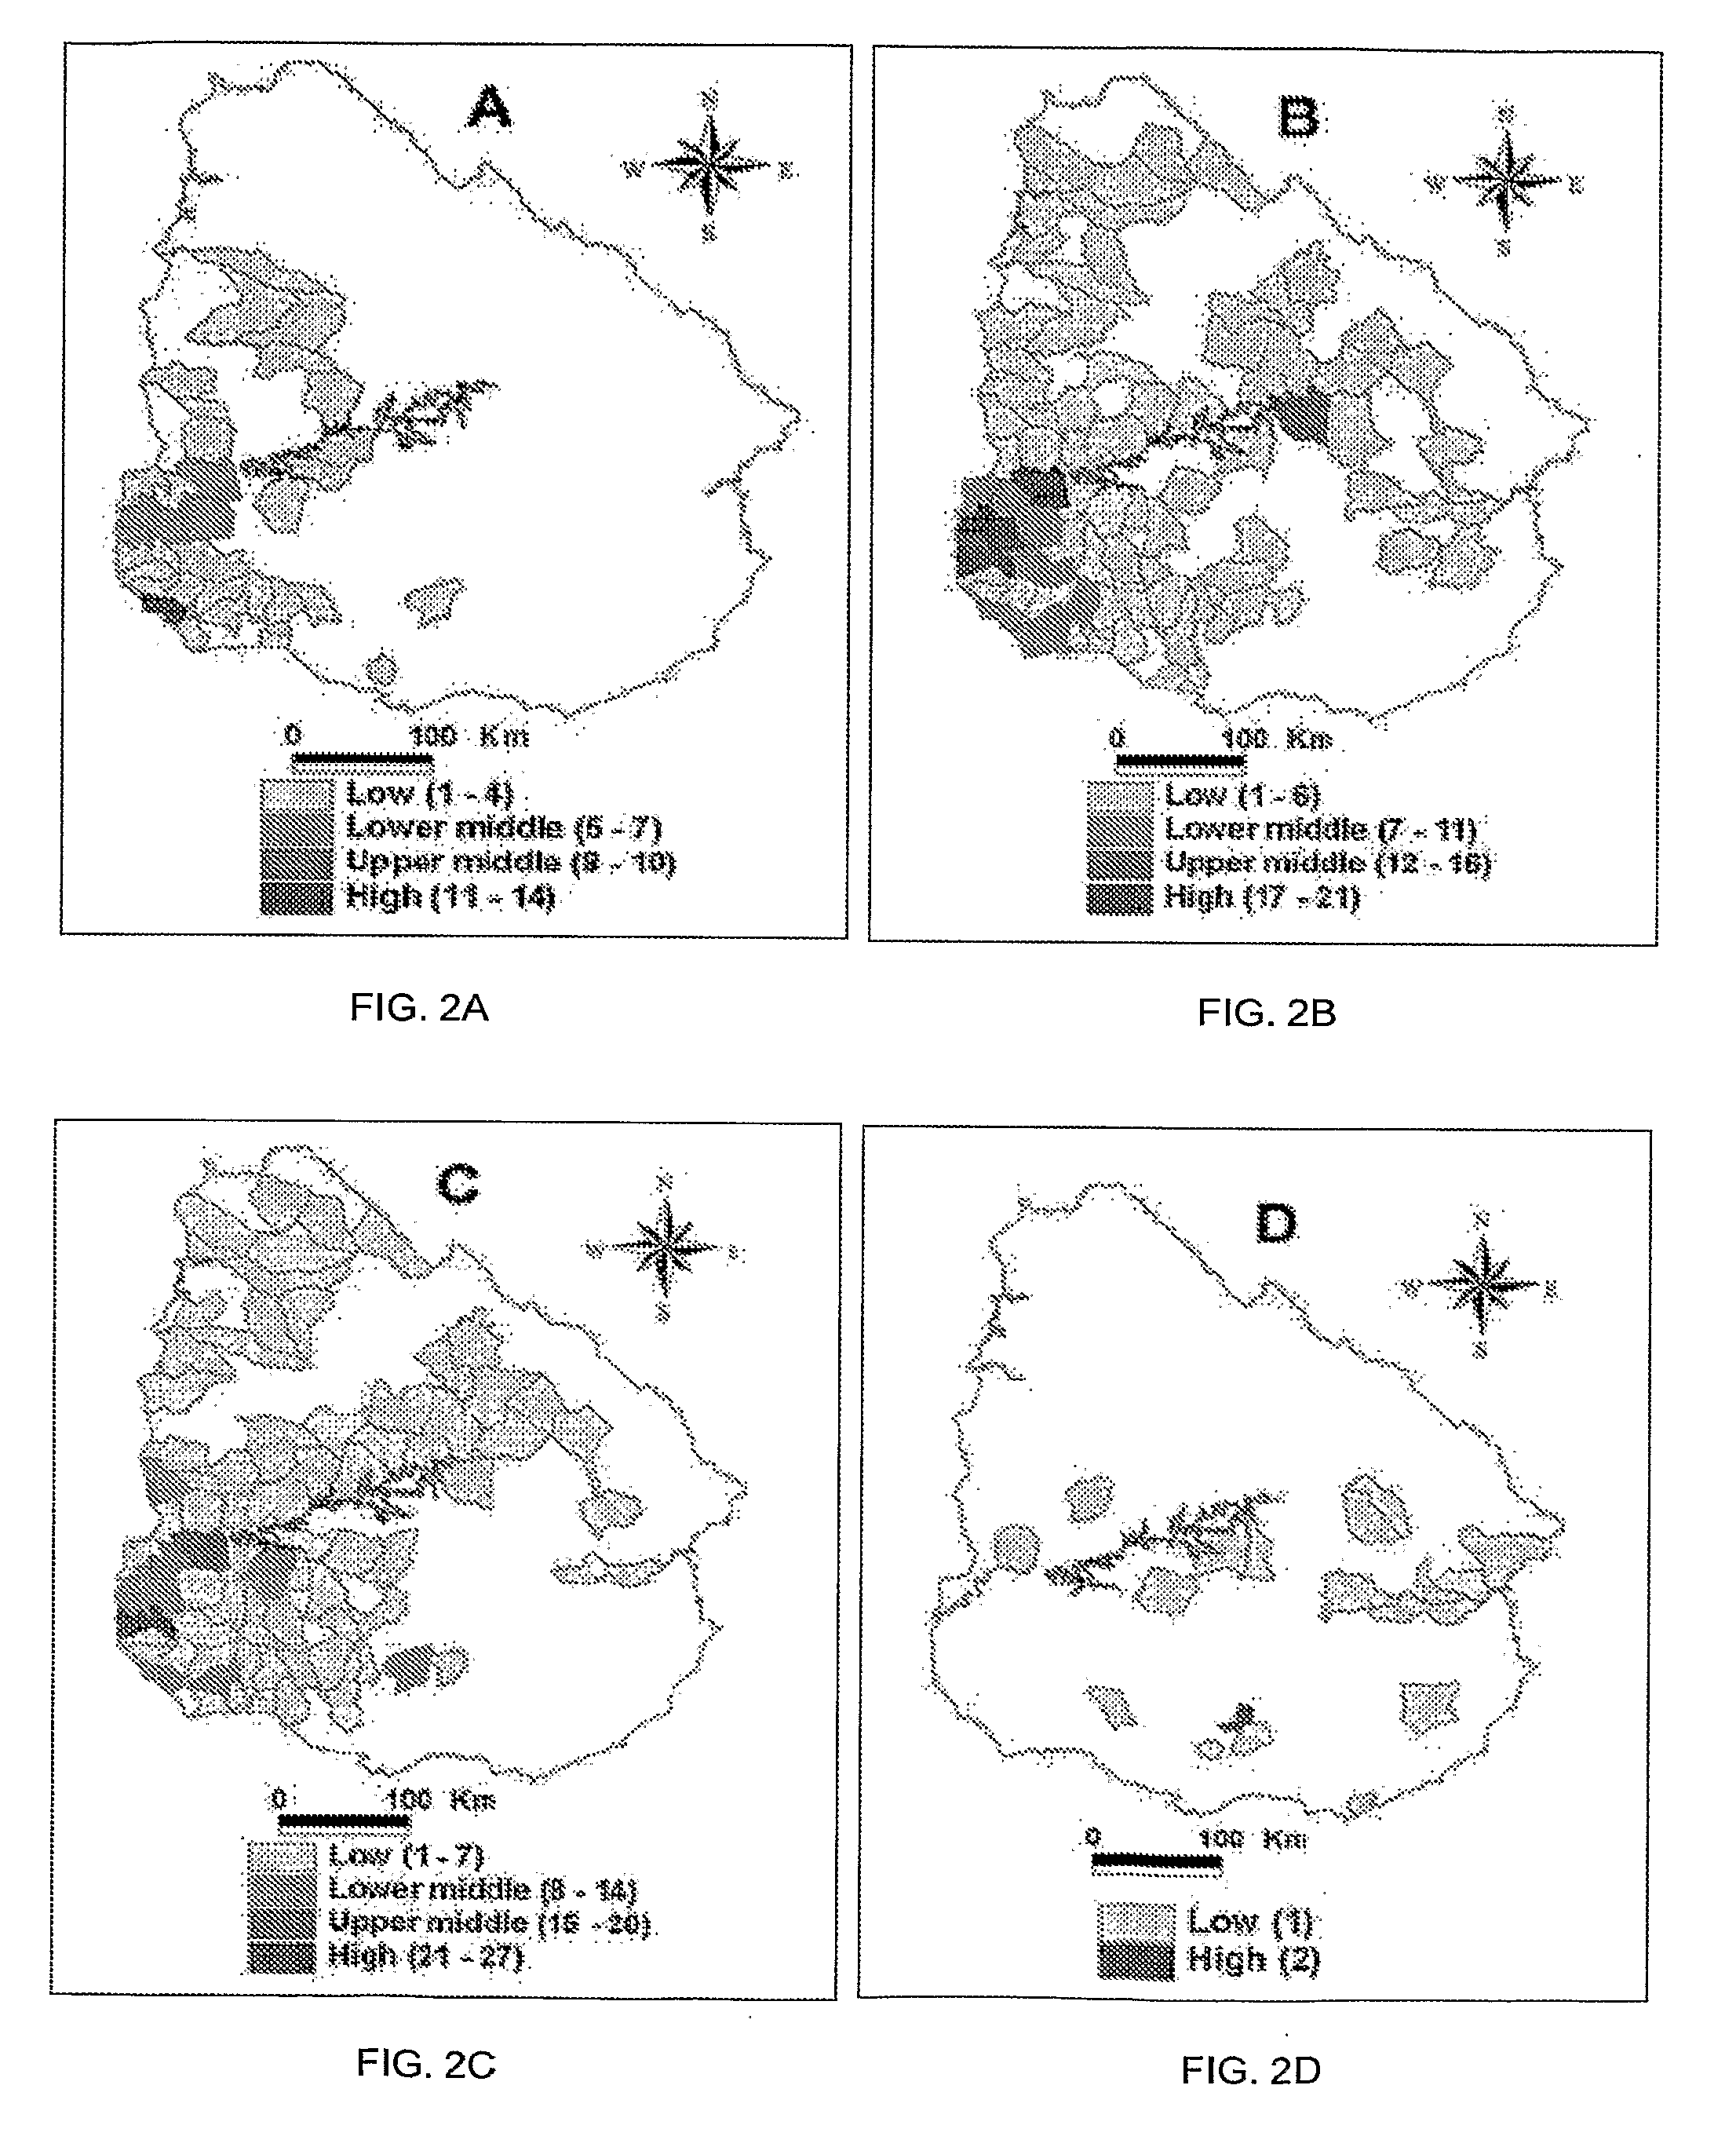 Method of identifying clusters and connectivity between clusters